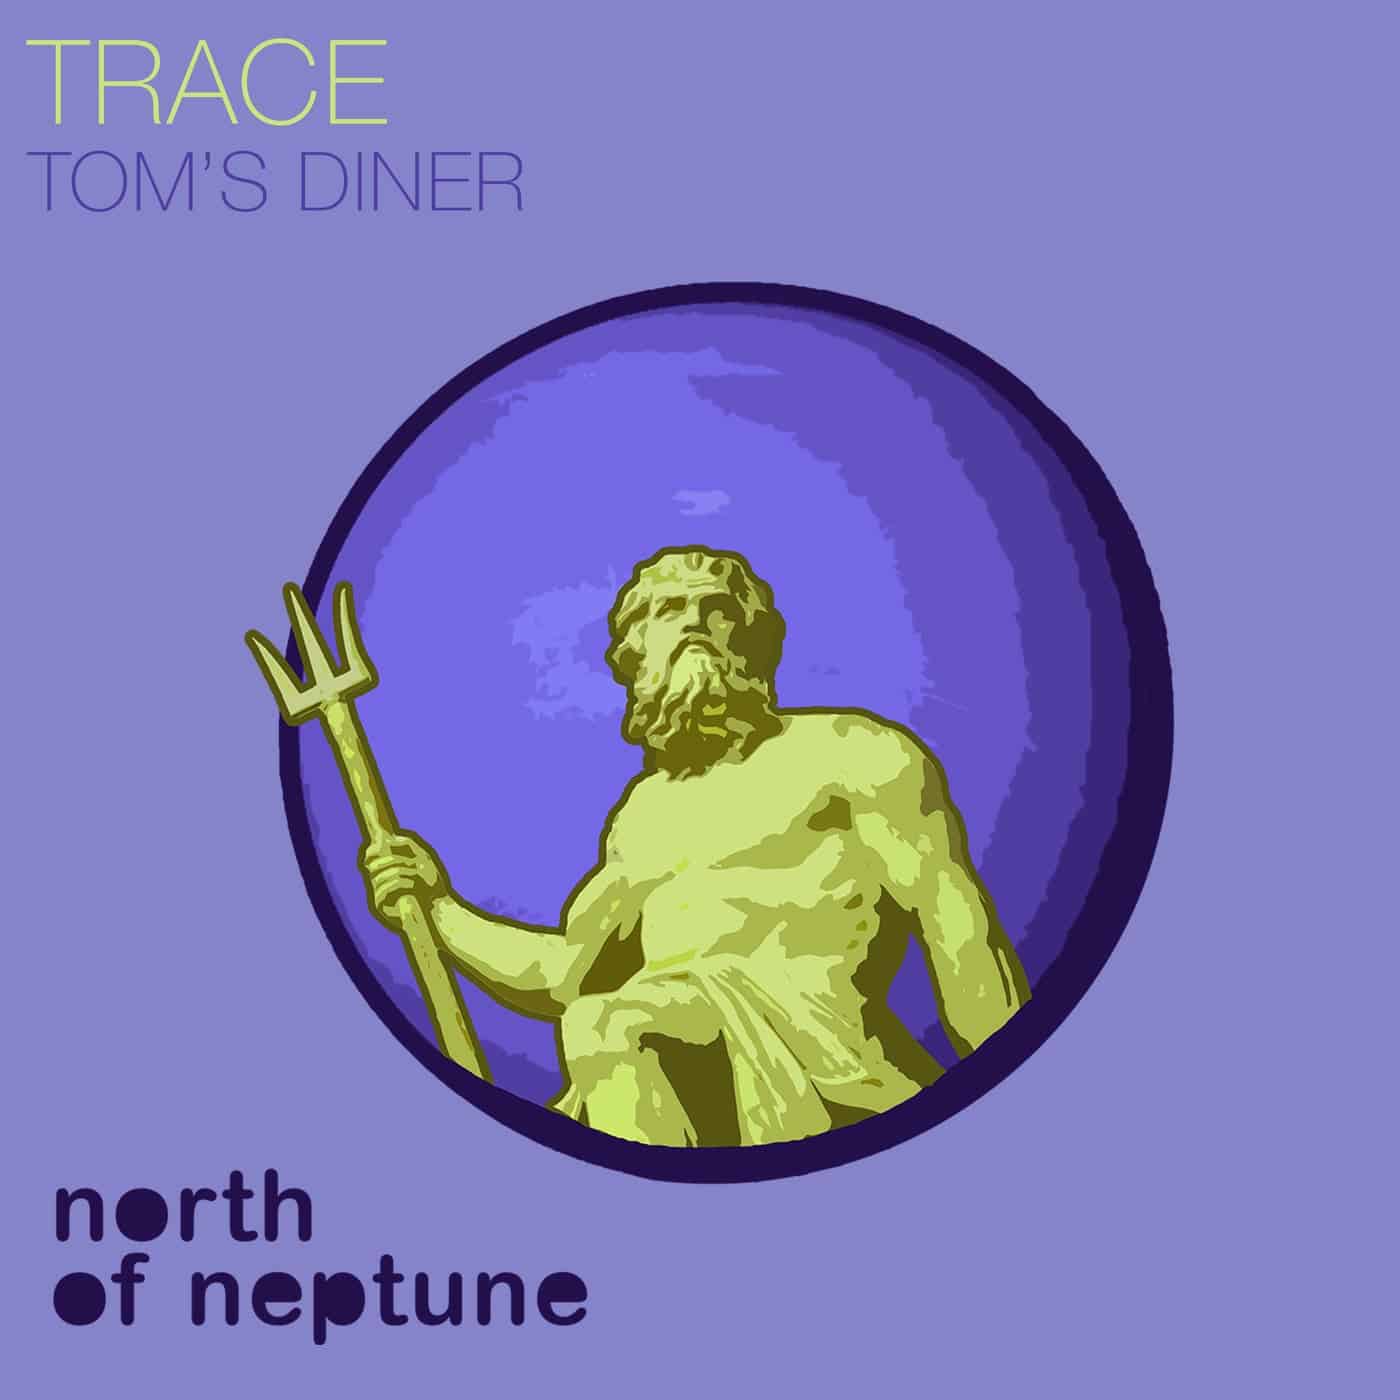 image cover: Trace (UZ) - Tom's Diner on North of Neptune